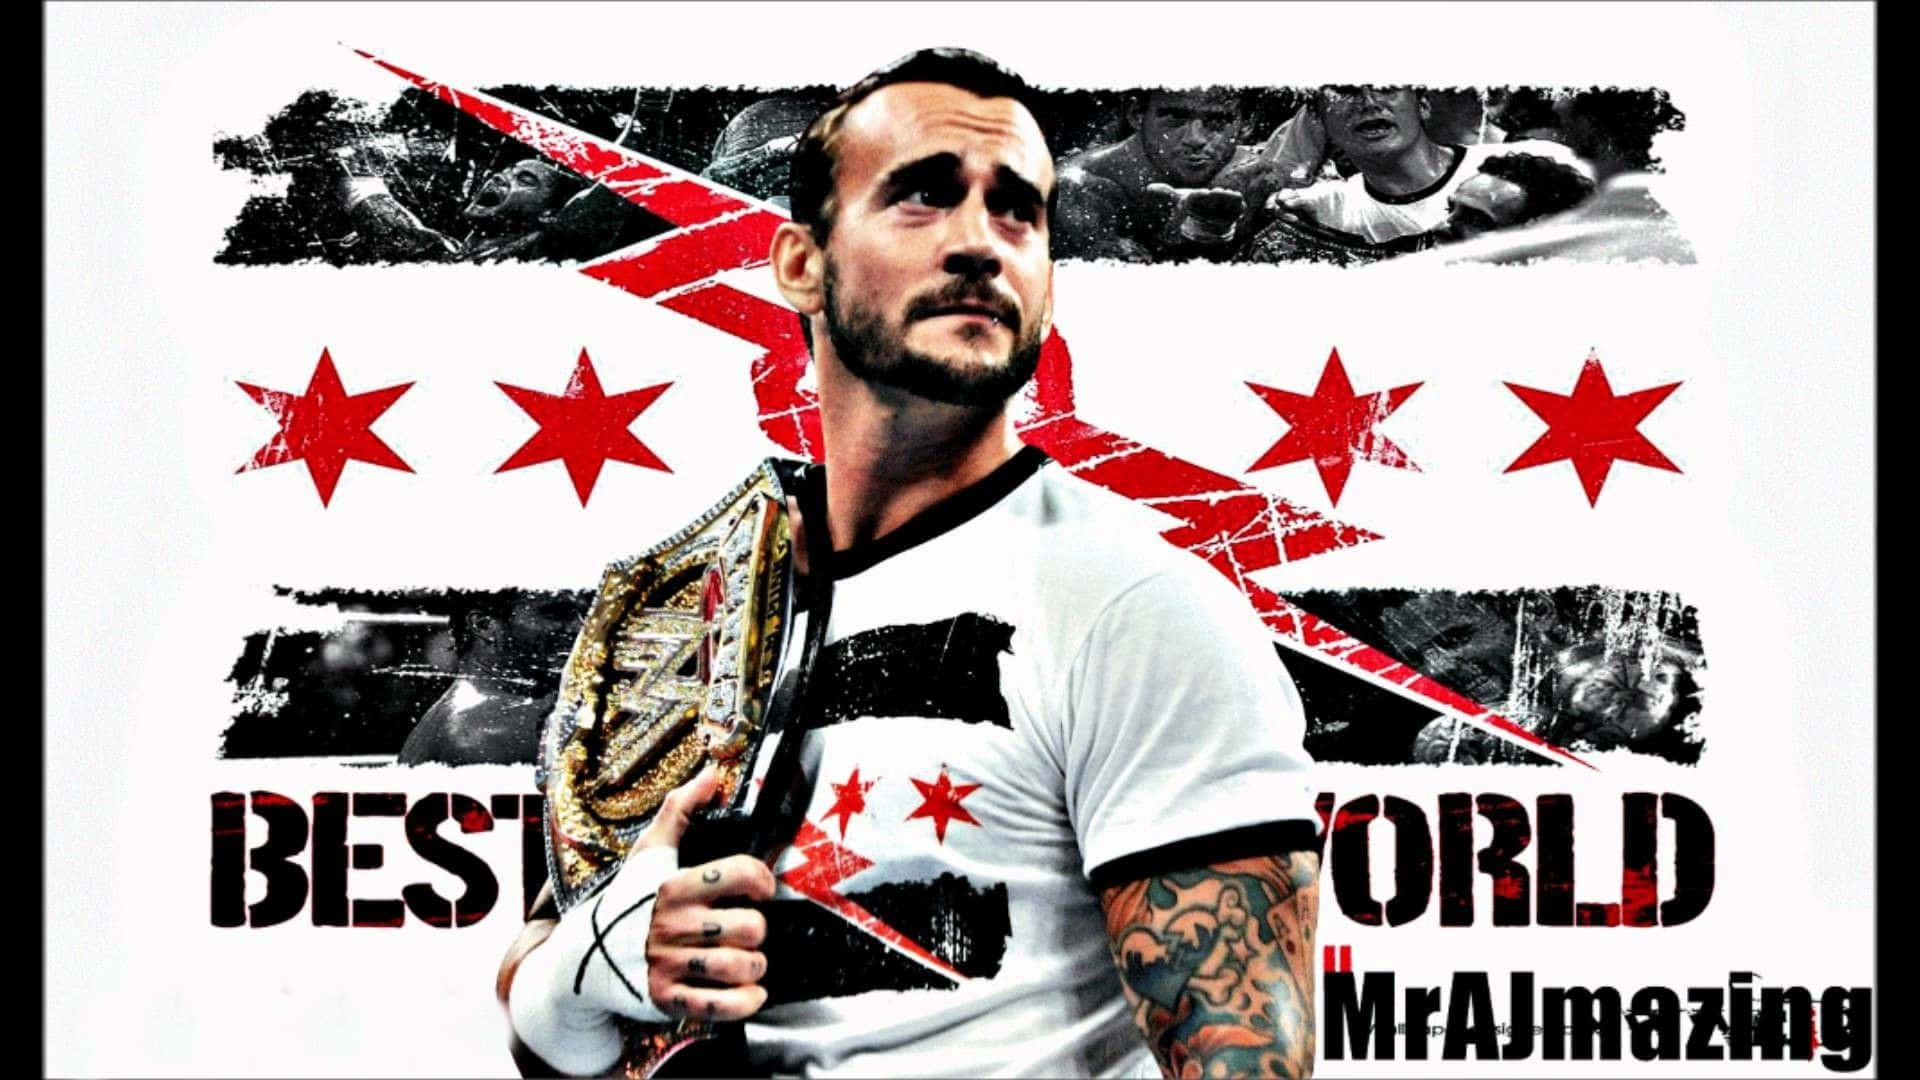 A Man With Tattoos Holding A Wrestling Belt Background